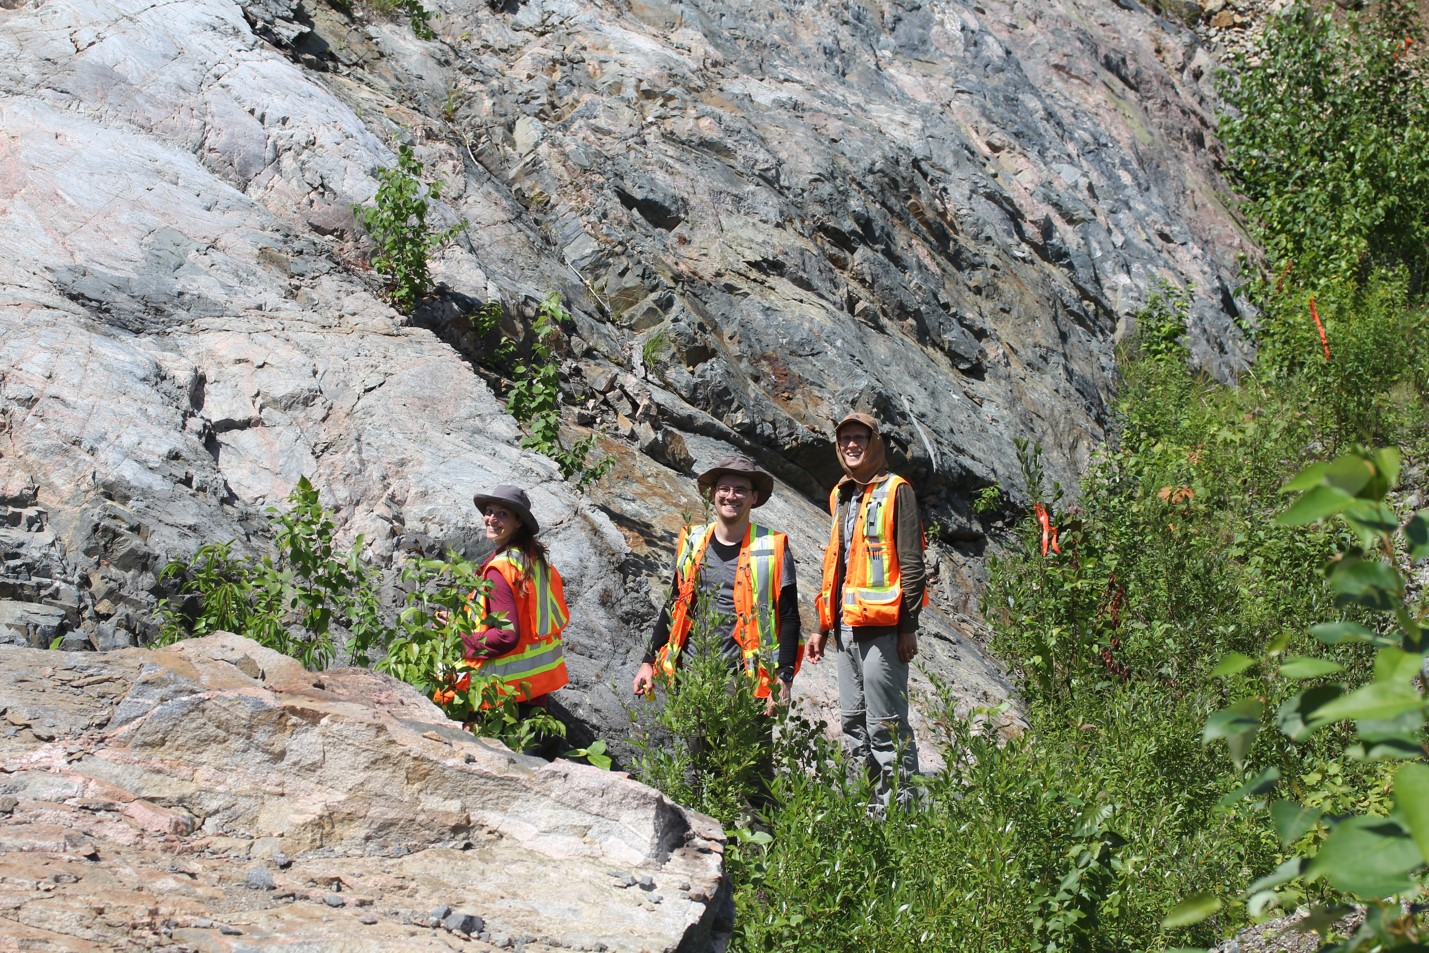 Sandra Baurier Aymat, Henning Seibel, and Dustin Peters in the field in Sudbury (photo by M Lesher)